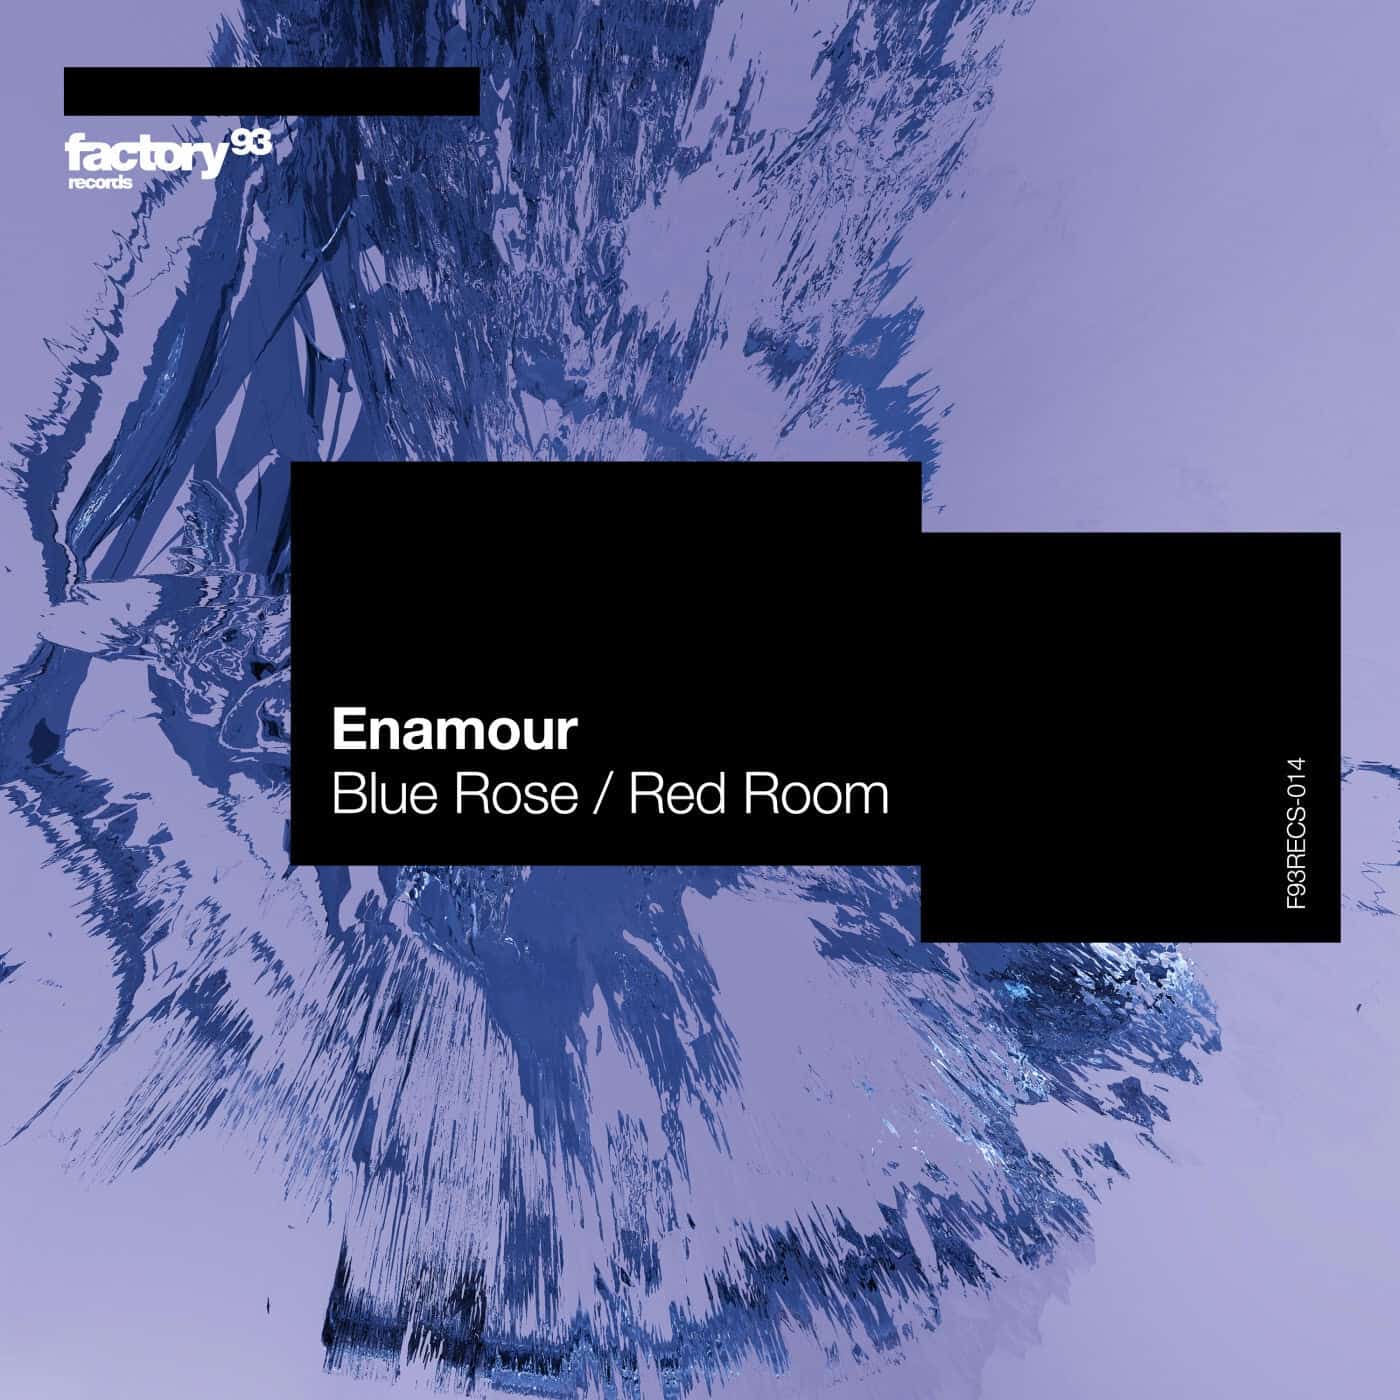 image cover: Enamour - Blue Rose / Red Room / F93RECS014B